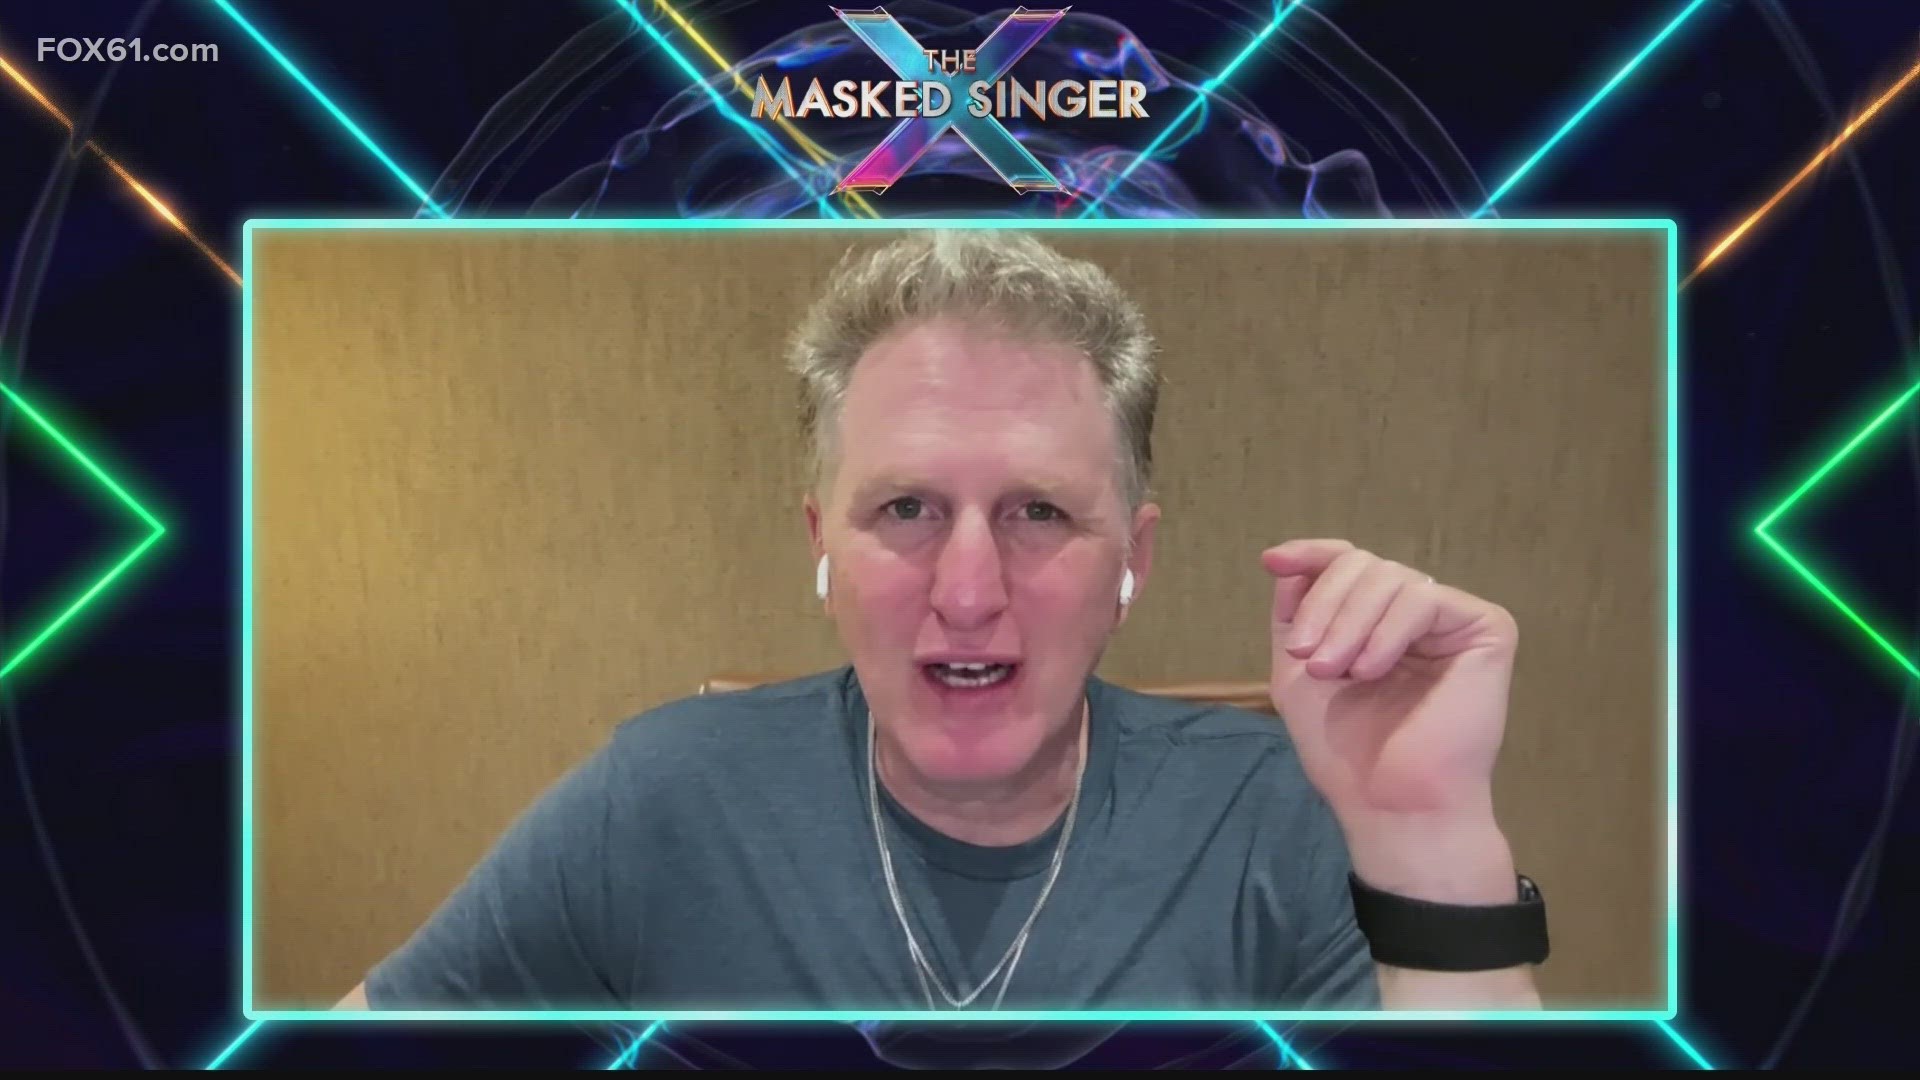 The Pickle is the latest to be unmasked in The Masked Singer. FOX61 speaks to Michael Rapaport about his time on the show.